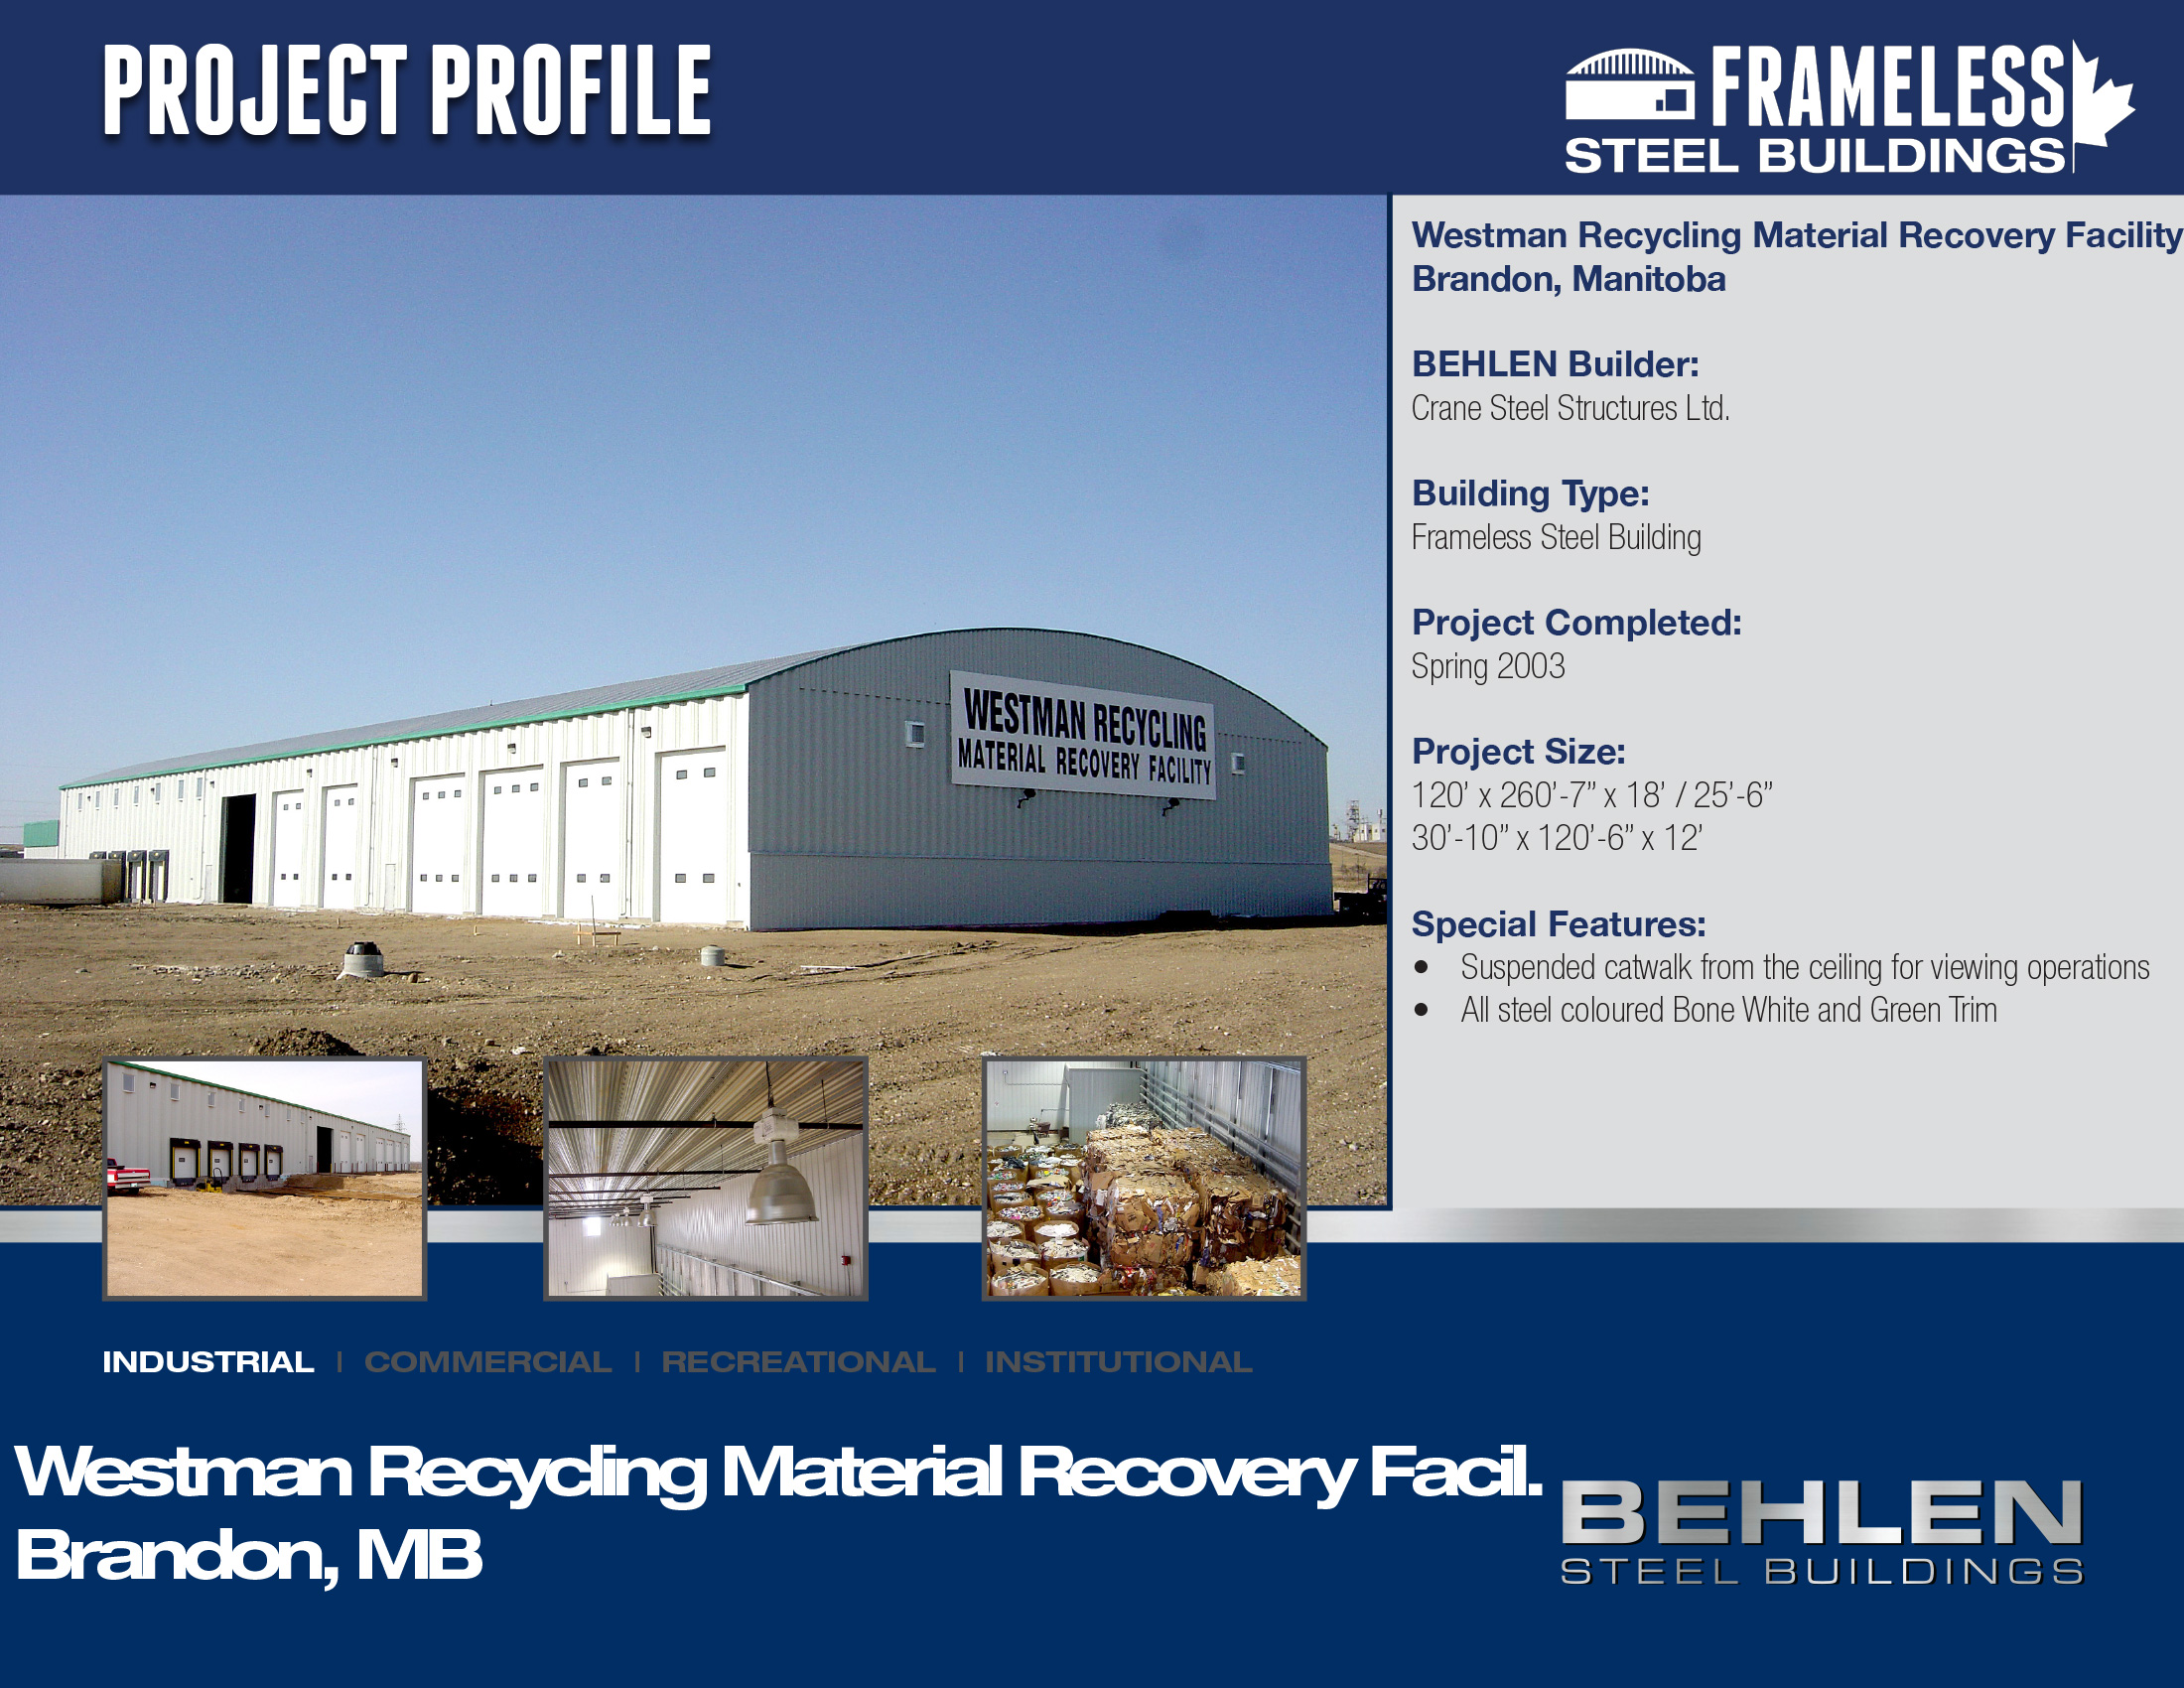 Westman Recycling Material Recovery Facility